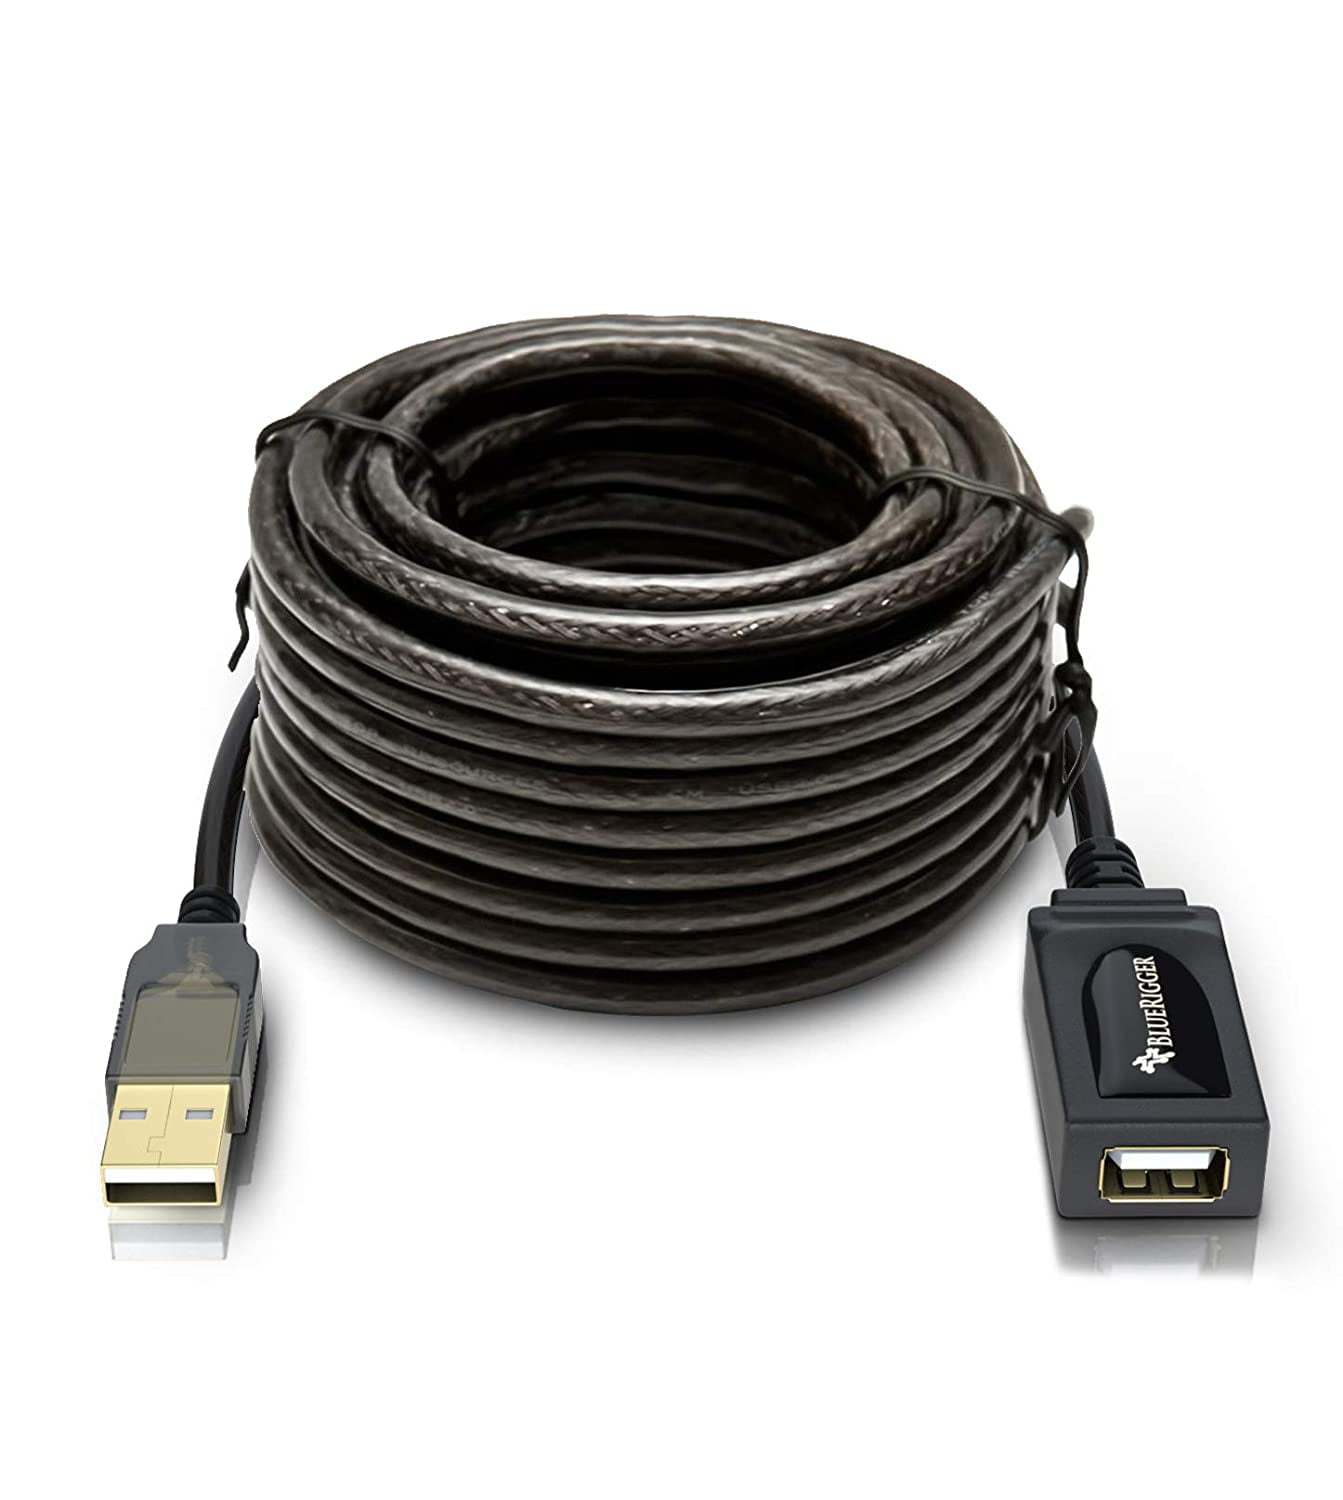 USB Active Extension Cable - 7.5M Long Cord, Extender, Male to Female Repeater)- for Game - Walmart.com